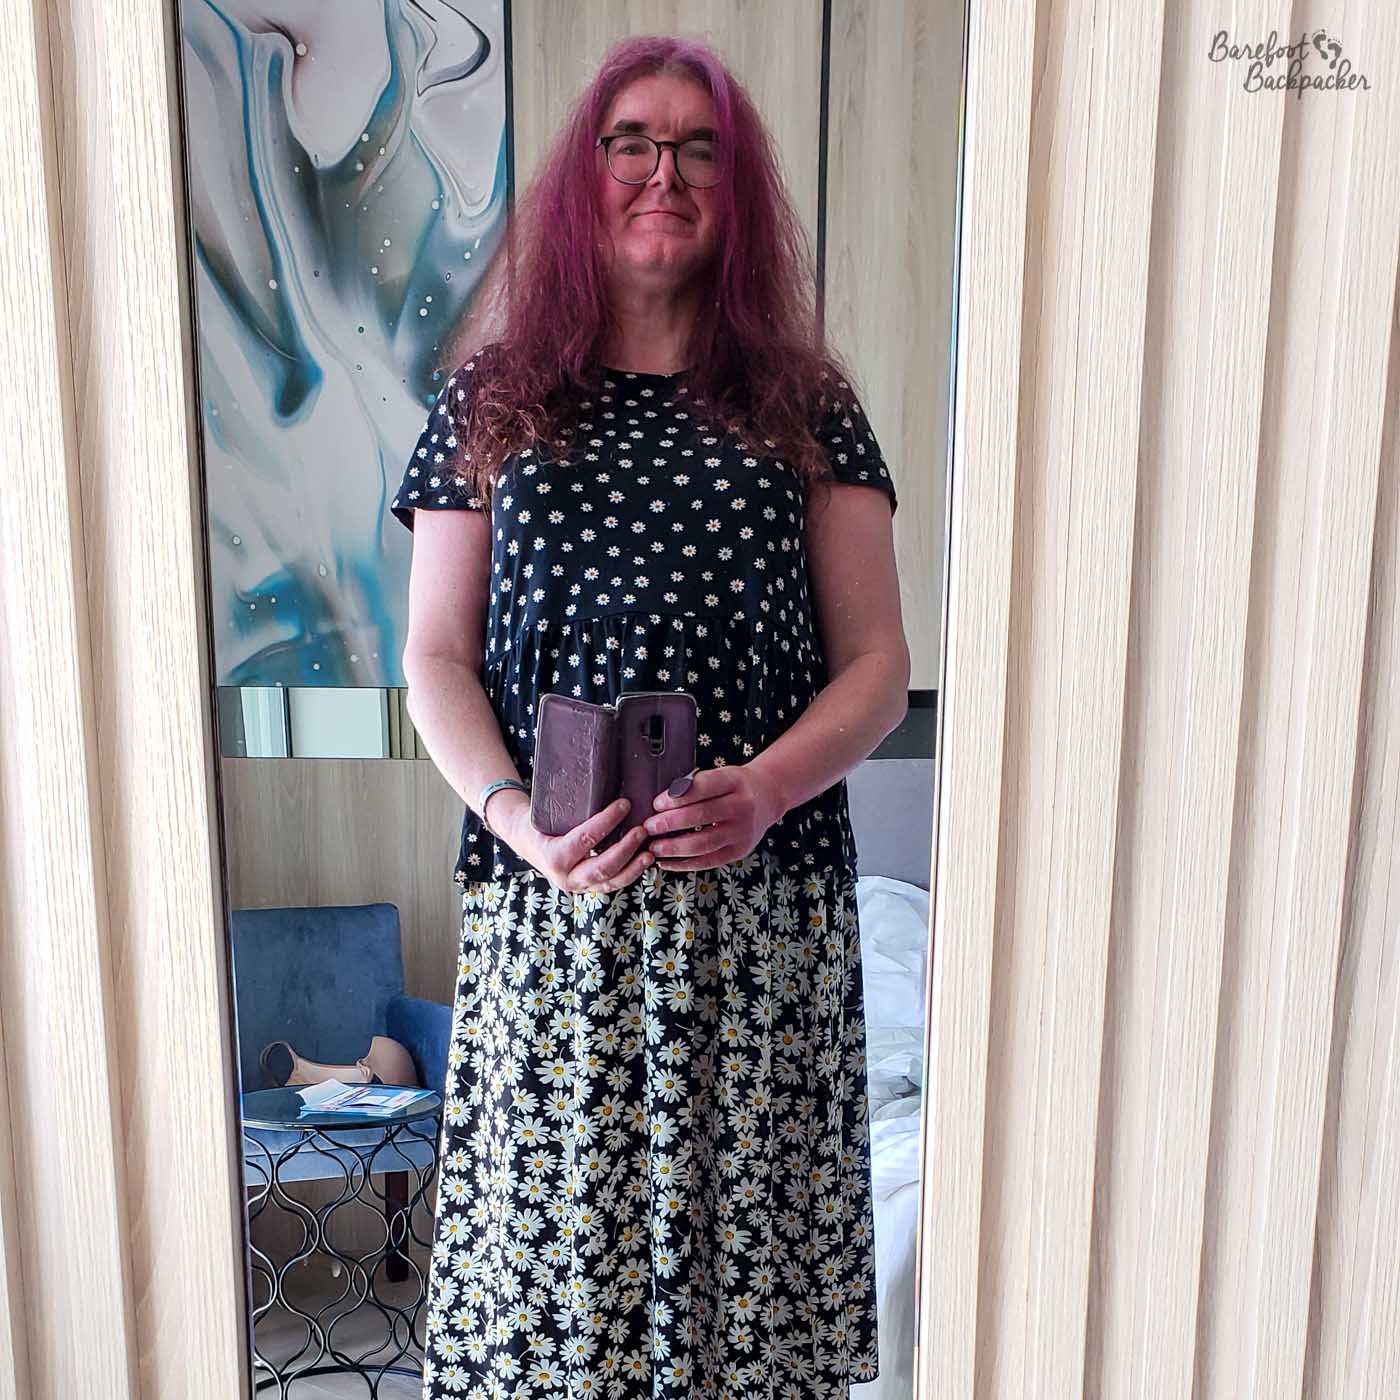 Person is taking a selfie in front of a mirror. They are wearing a daisy-print blouse and a daisy-print skirt, which don't match patterns. They have long straight hair and are holding their phone down and out in front of them. The picture is taken in a hotel room.